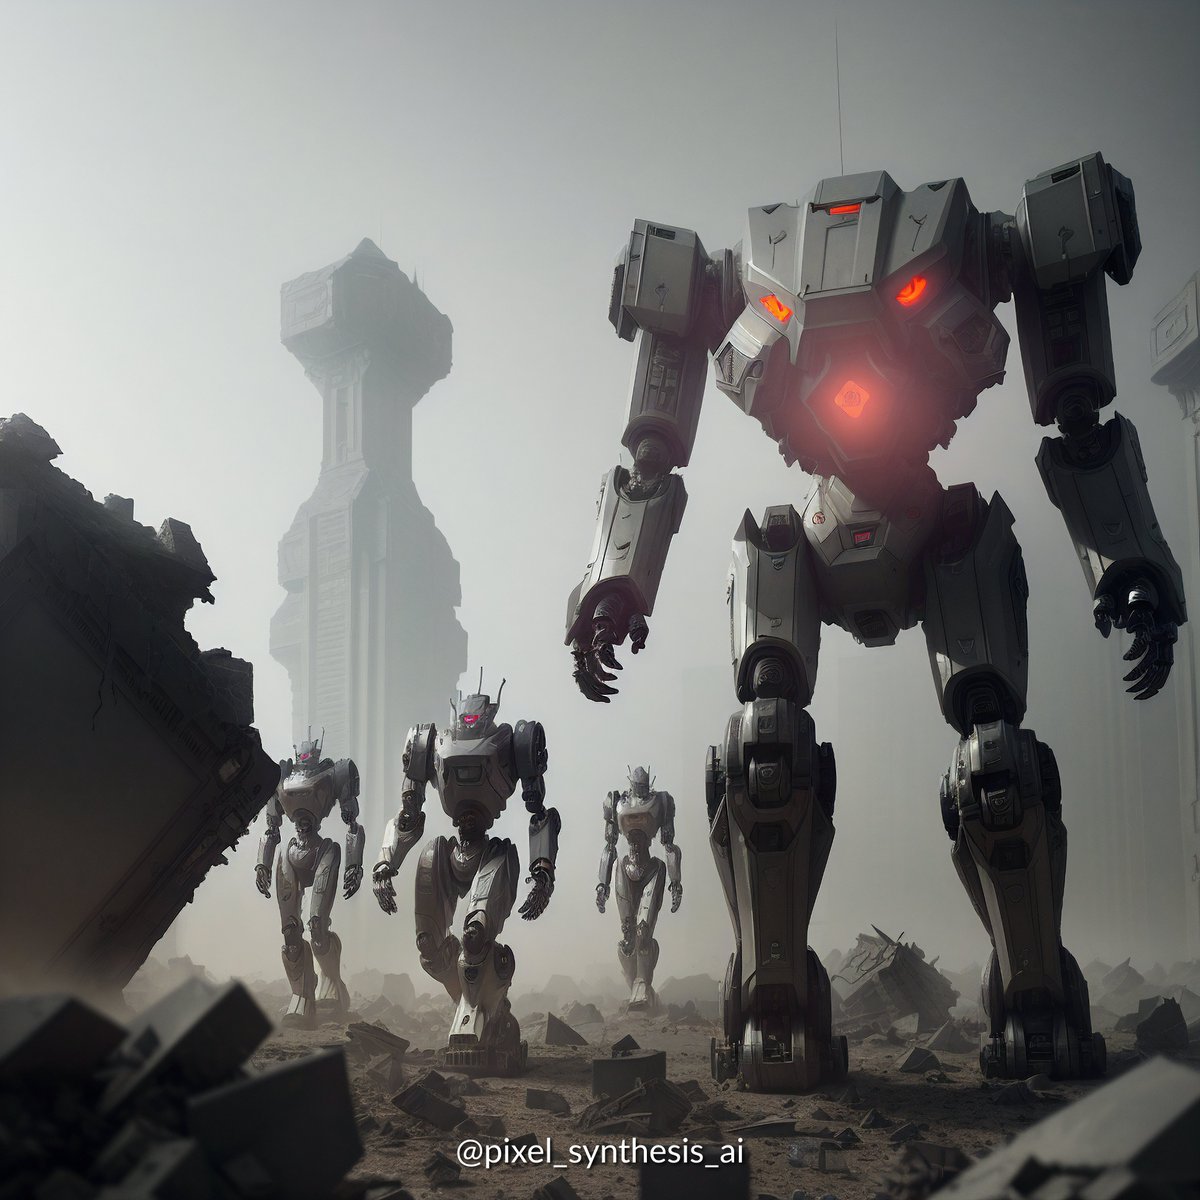 Behold the impending arrival of the 'Robot Army', imagined by AI 🤖💥🔥.

#aiart #aigeneratedart #stablediffusionart #sdxl #huggingface #openai #chatgpt #civitai #airender #aiimage #aiimagery #digitalart #masterpiece #robot #robotarmy #mecha #aiartist #aiartistry #aicreation